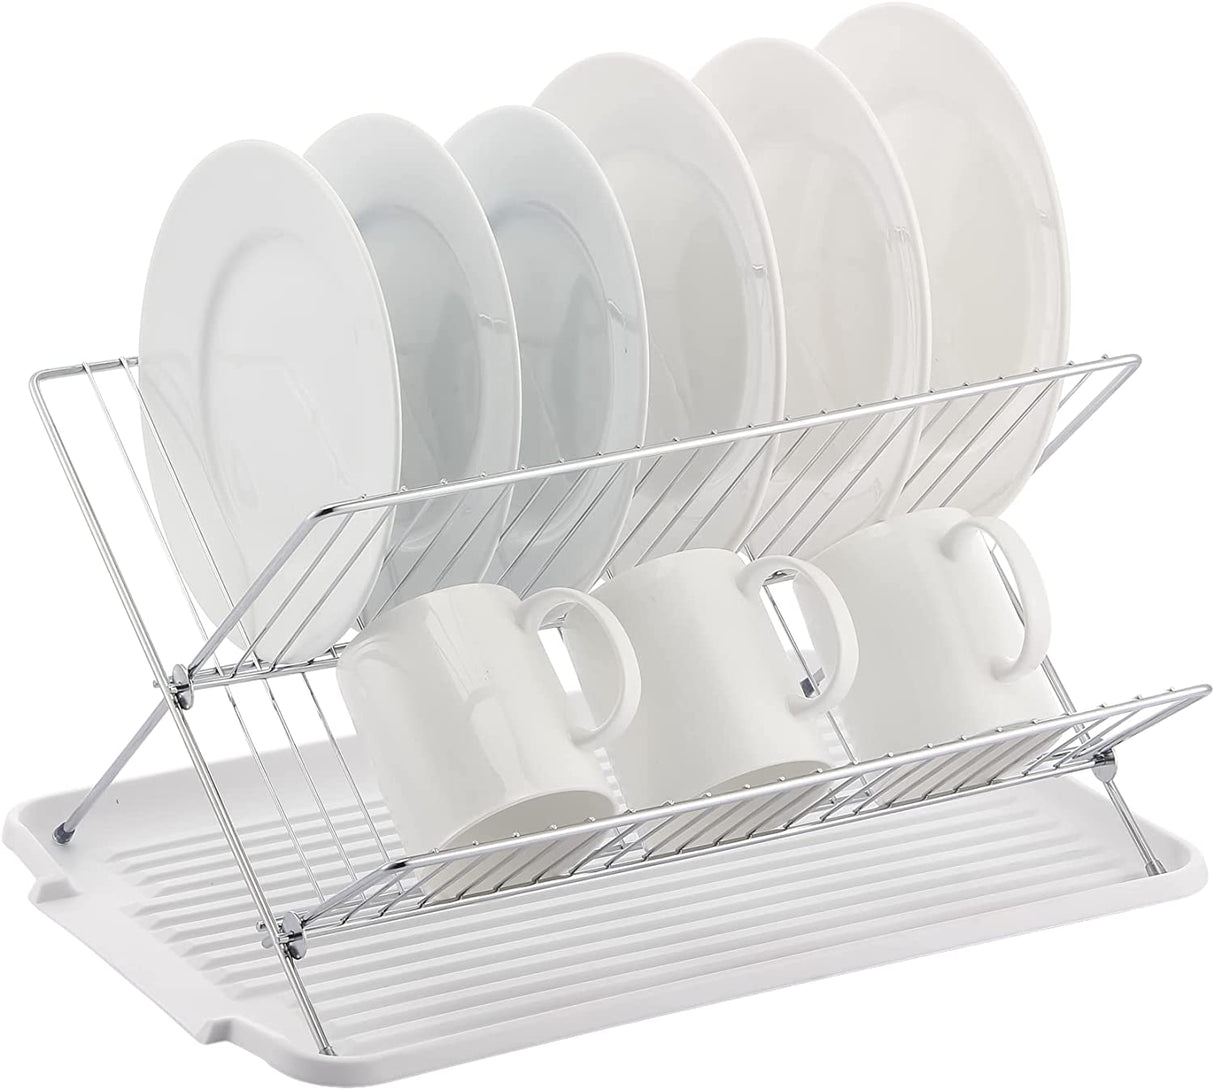 J&V Textiles x Shaped Stainless Steel 2-Tier Dish Rack with Utensil and Cutting Board Holder in Black | 247-BK